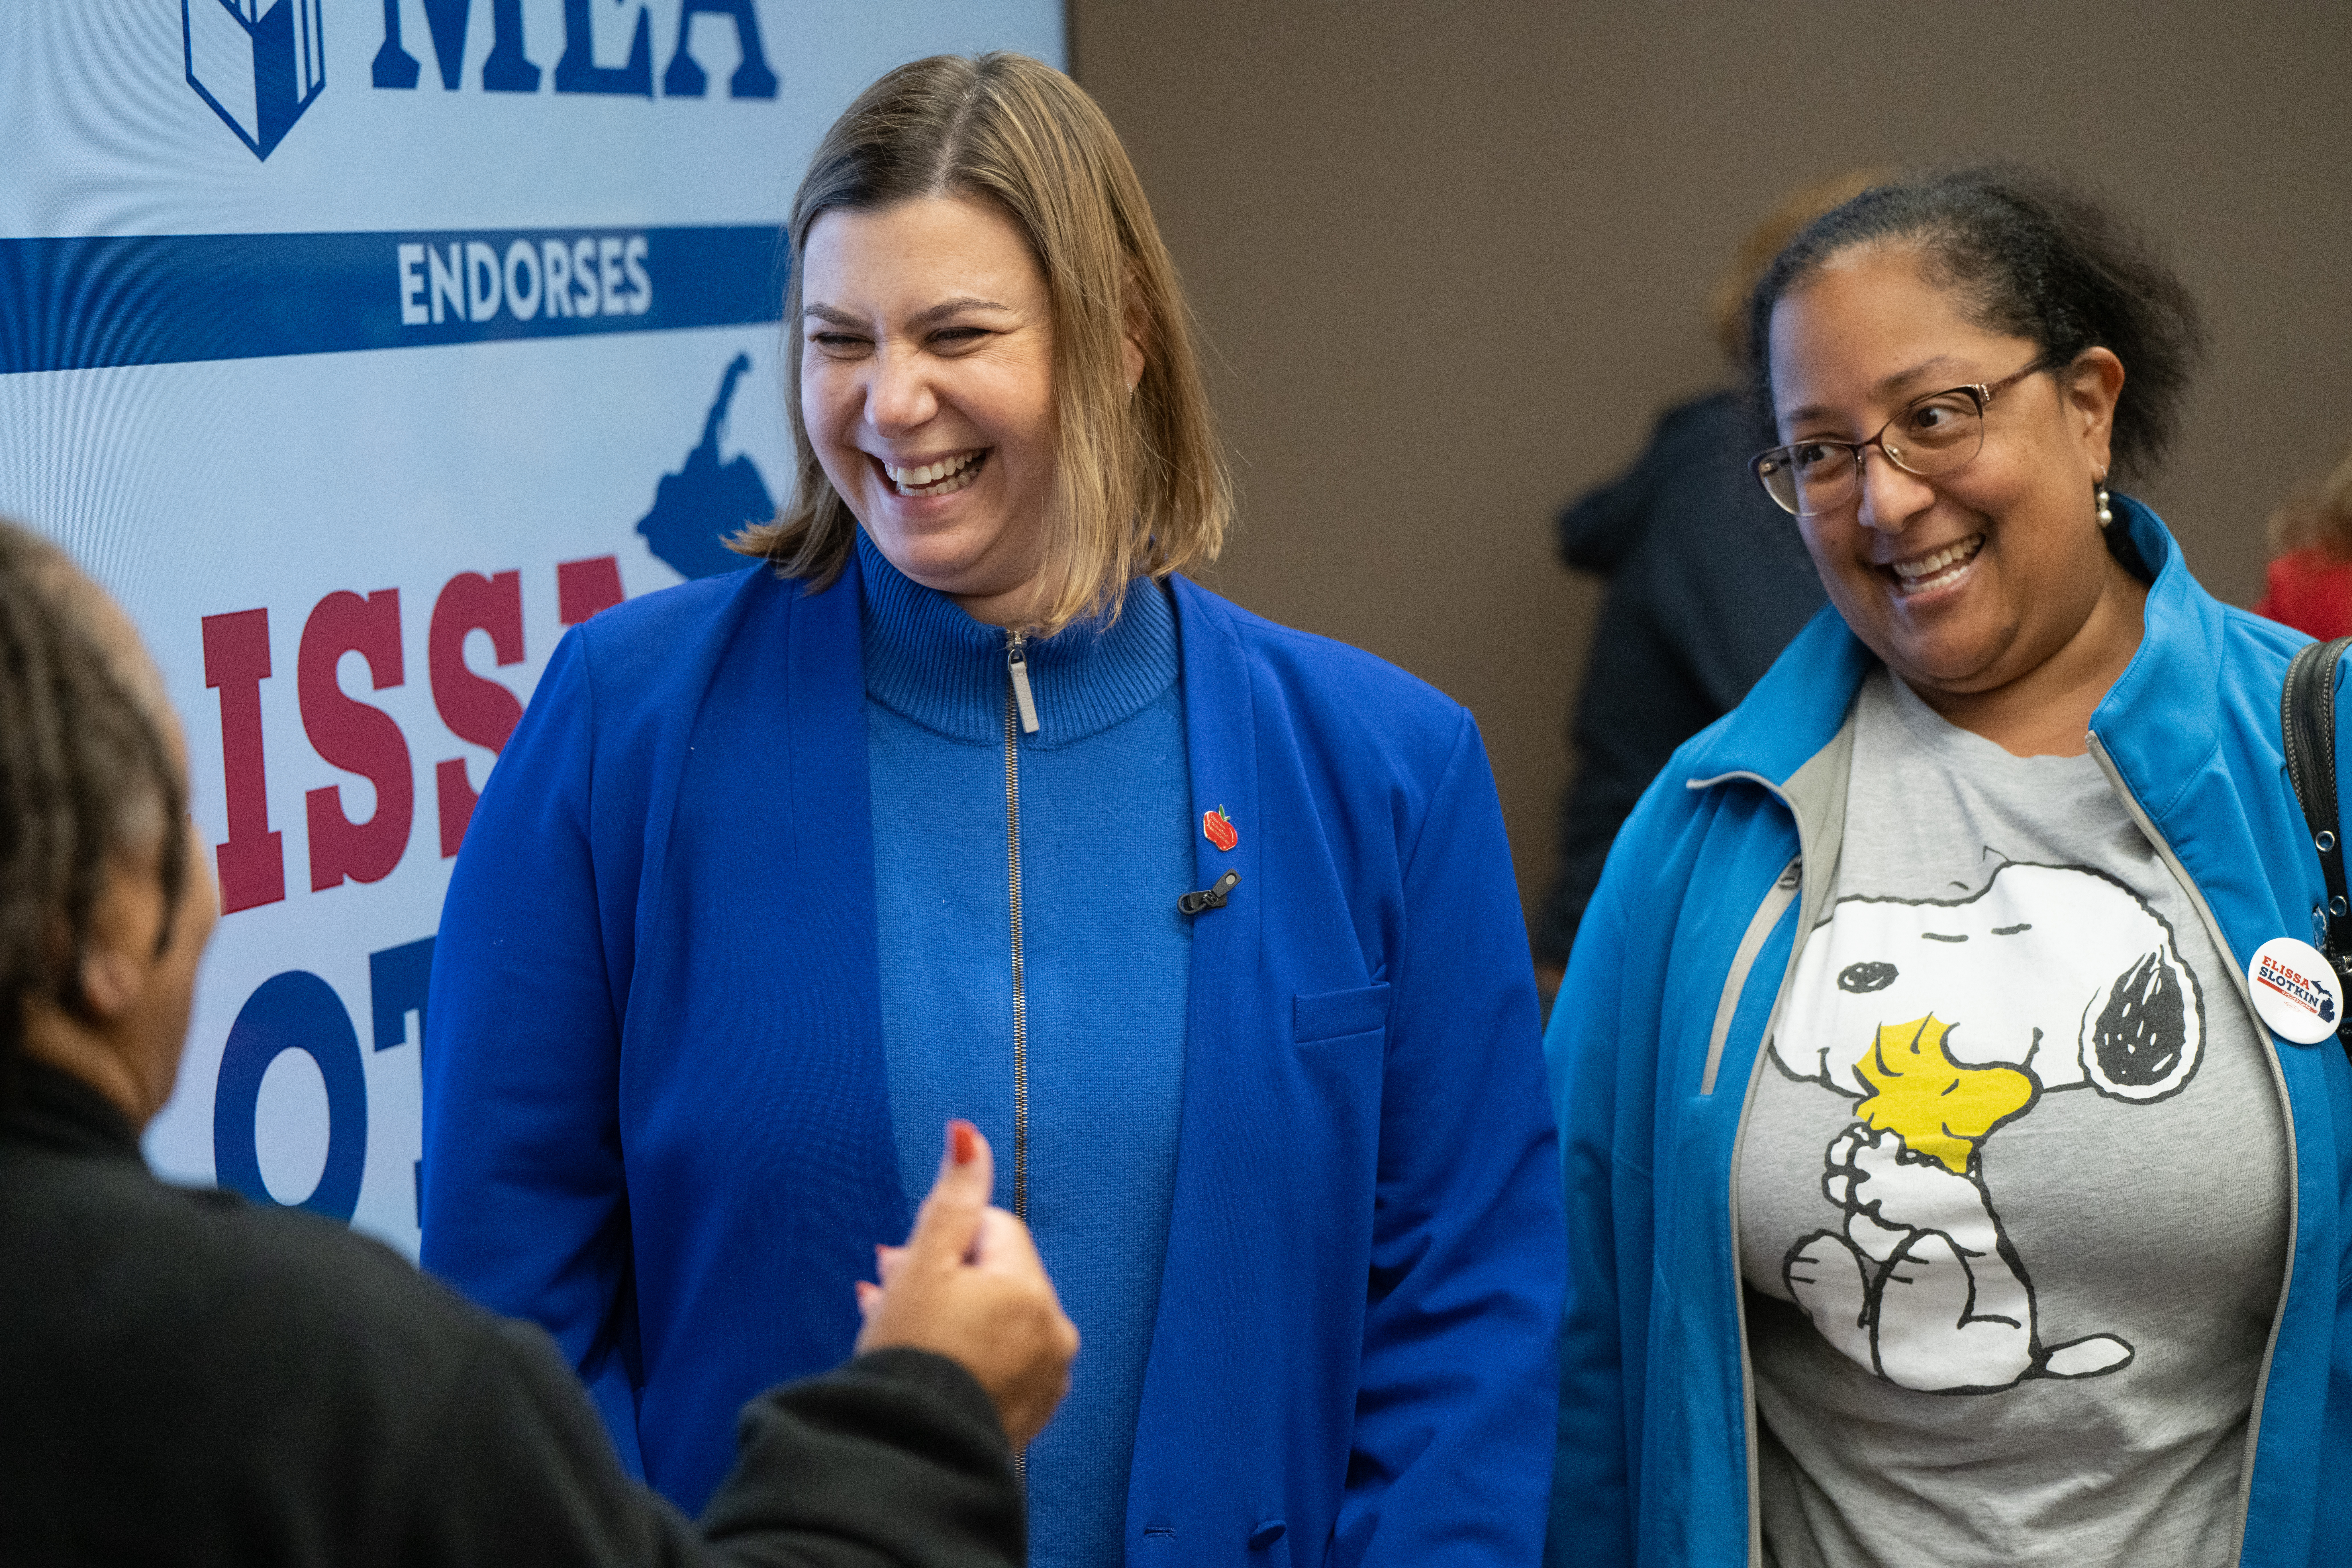 A picture of Elissa Slotkin smiling with a supporter.